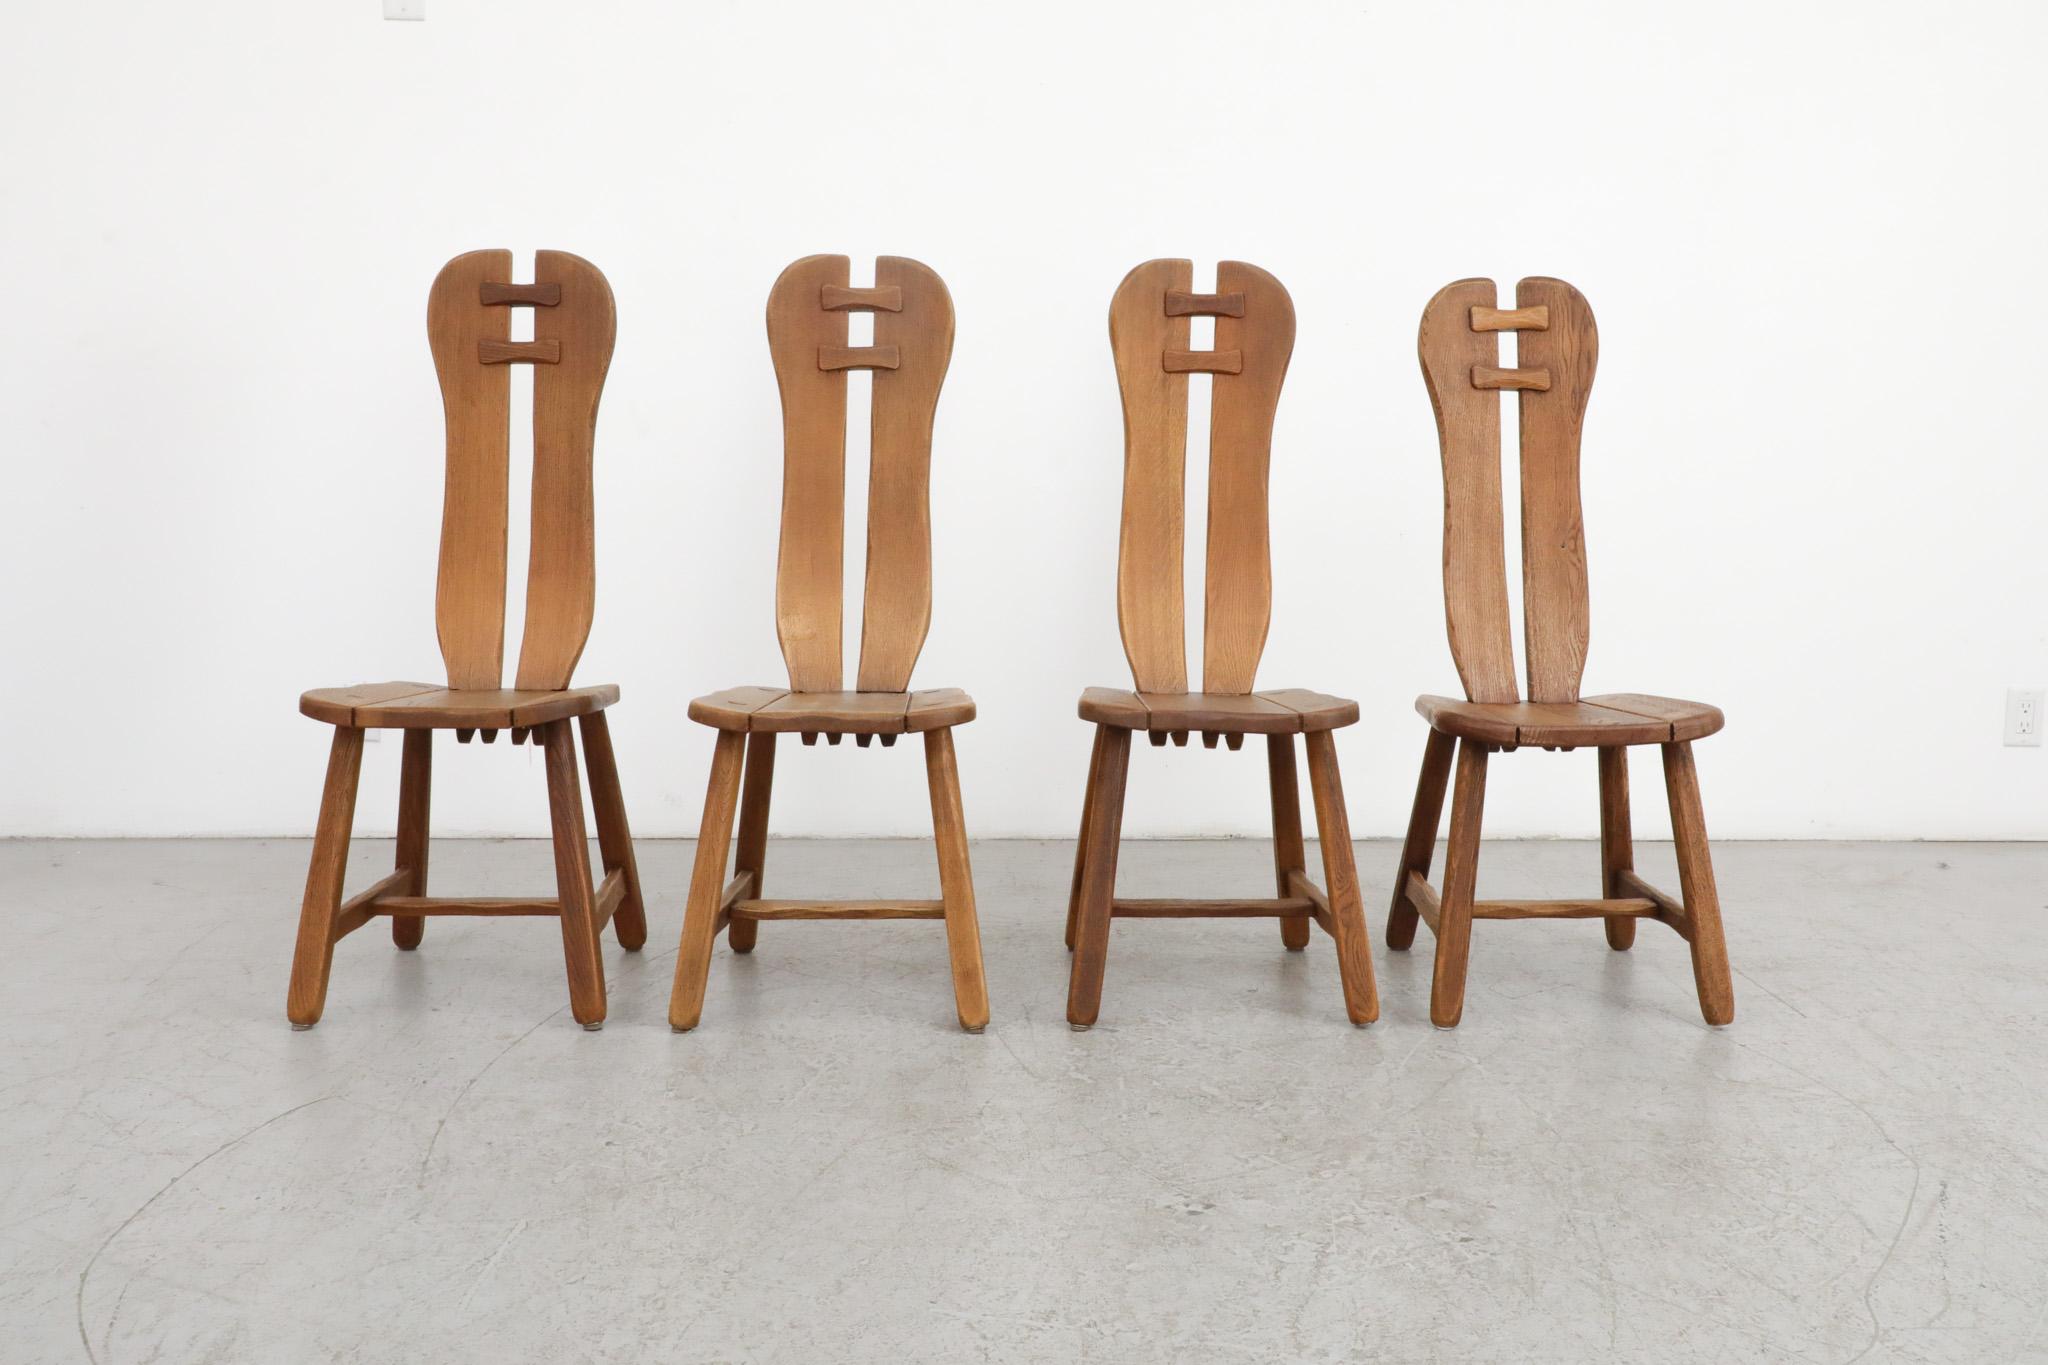 Set of 4, Mid-Century, high-back brutalist dining chairs manufactured by De Puydt, Belgium, 1970's. Sturdy oak with heavy grain, normal wear and lovely, deep patina for their age. In original condition with some visible cracking. Another matching